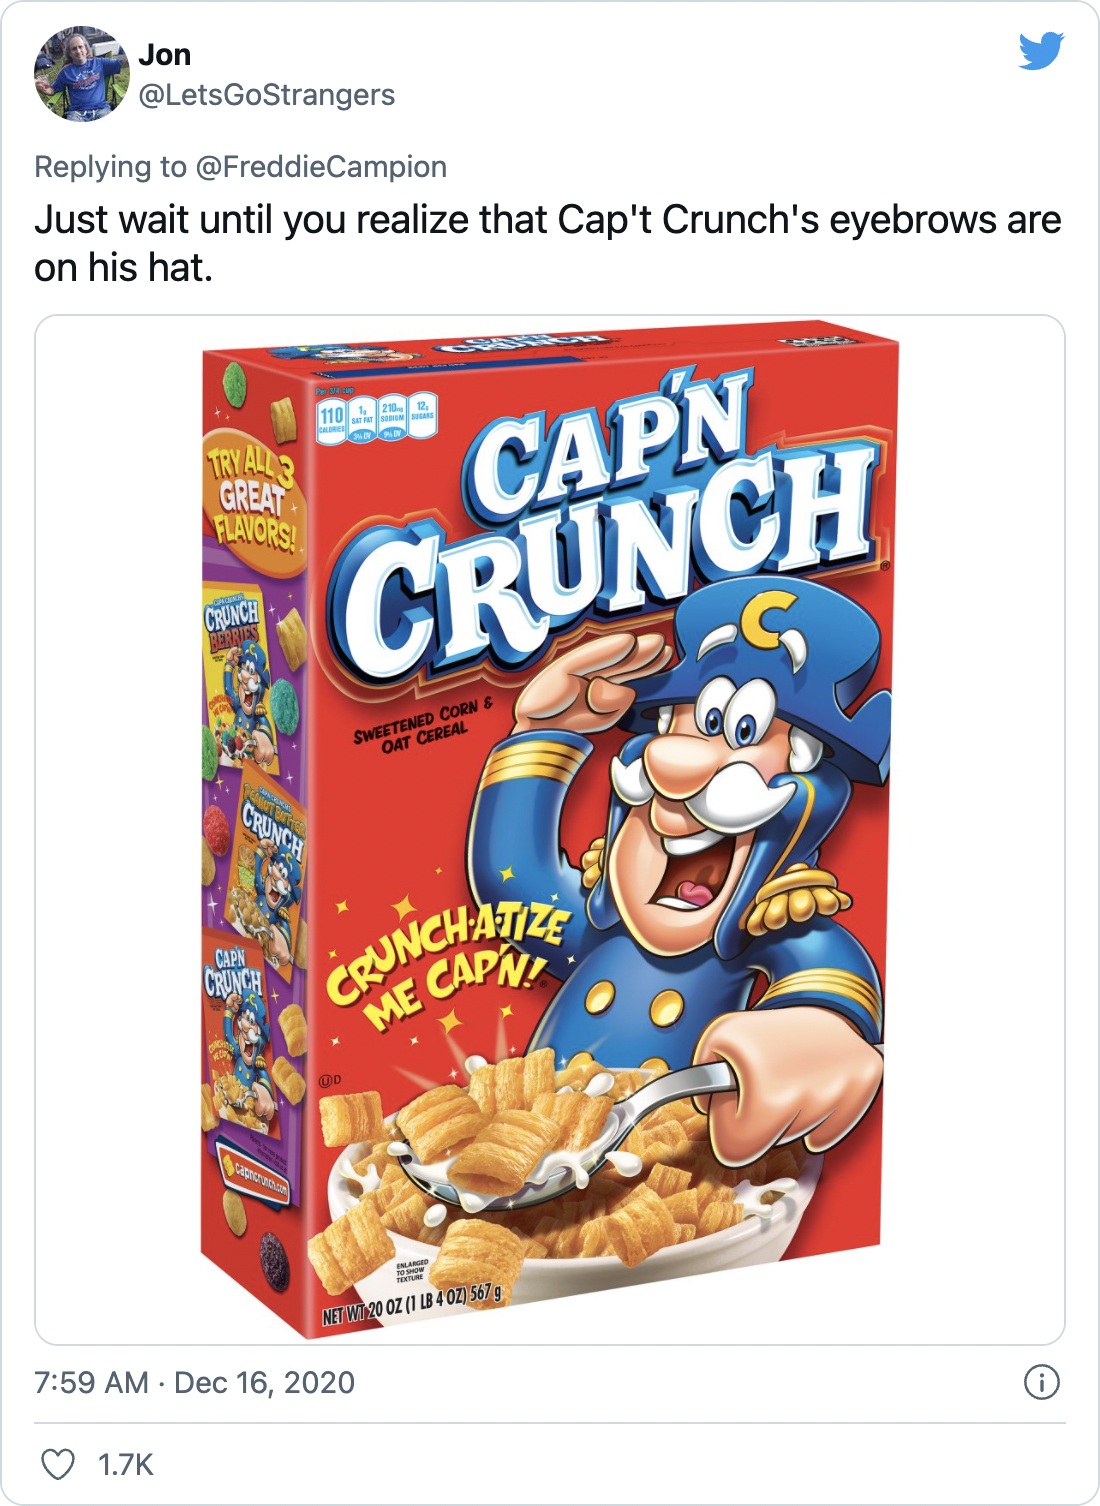 Just wait until you realize that Cap't Crunch's eyebrows are on his hat. - @LetsGoStrangers